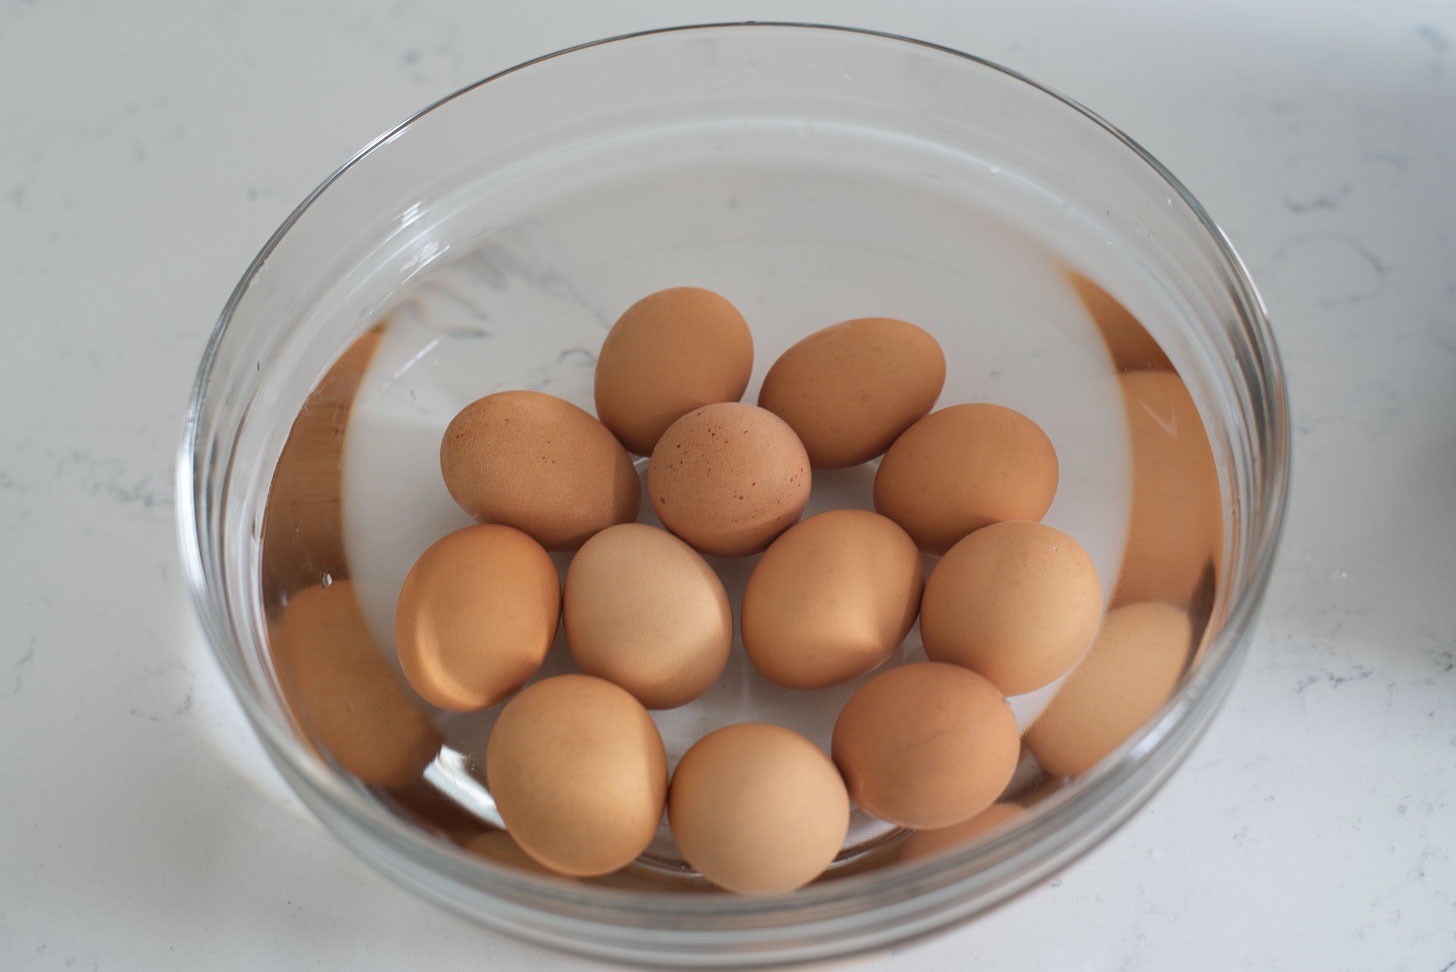 Cooked eggs are soaked in a bowl of cold water to cool down.